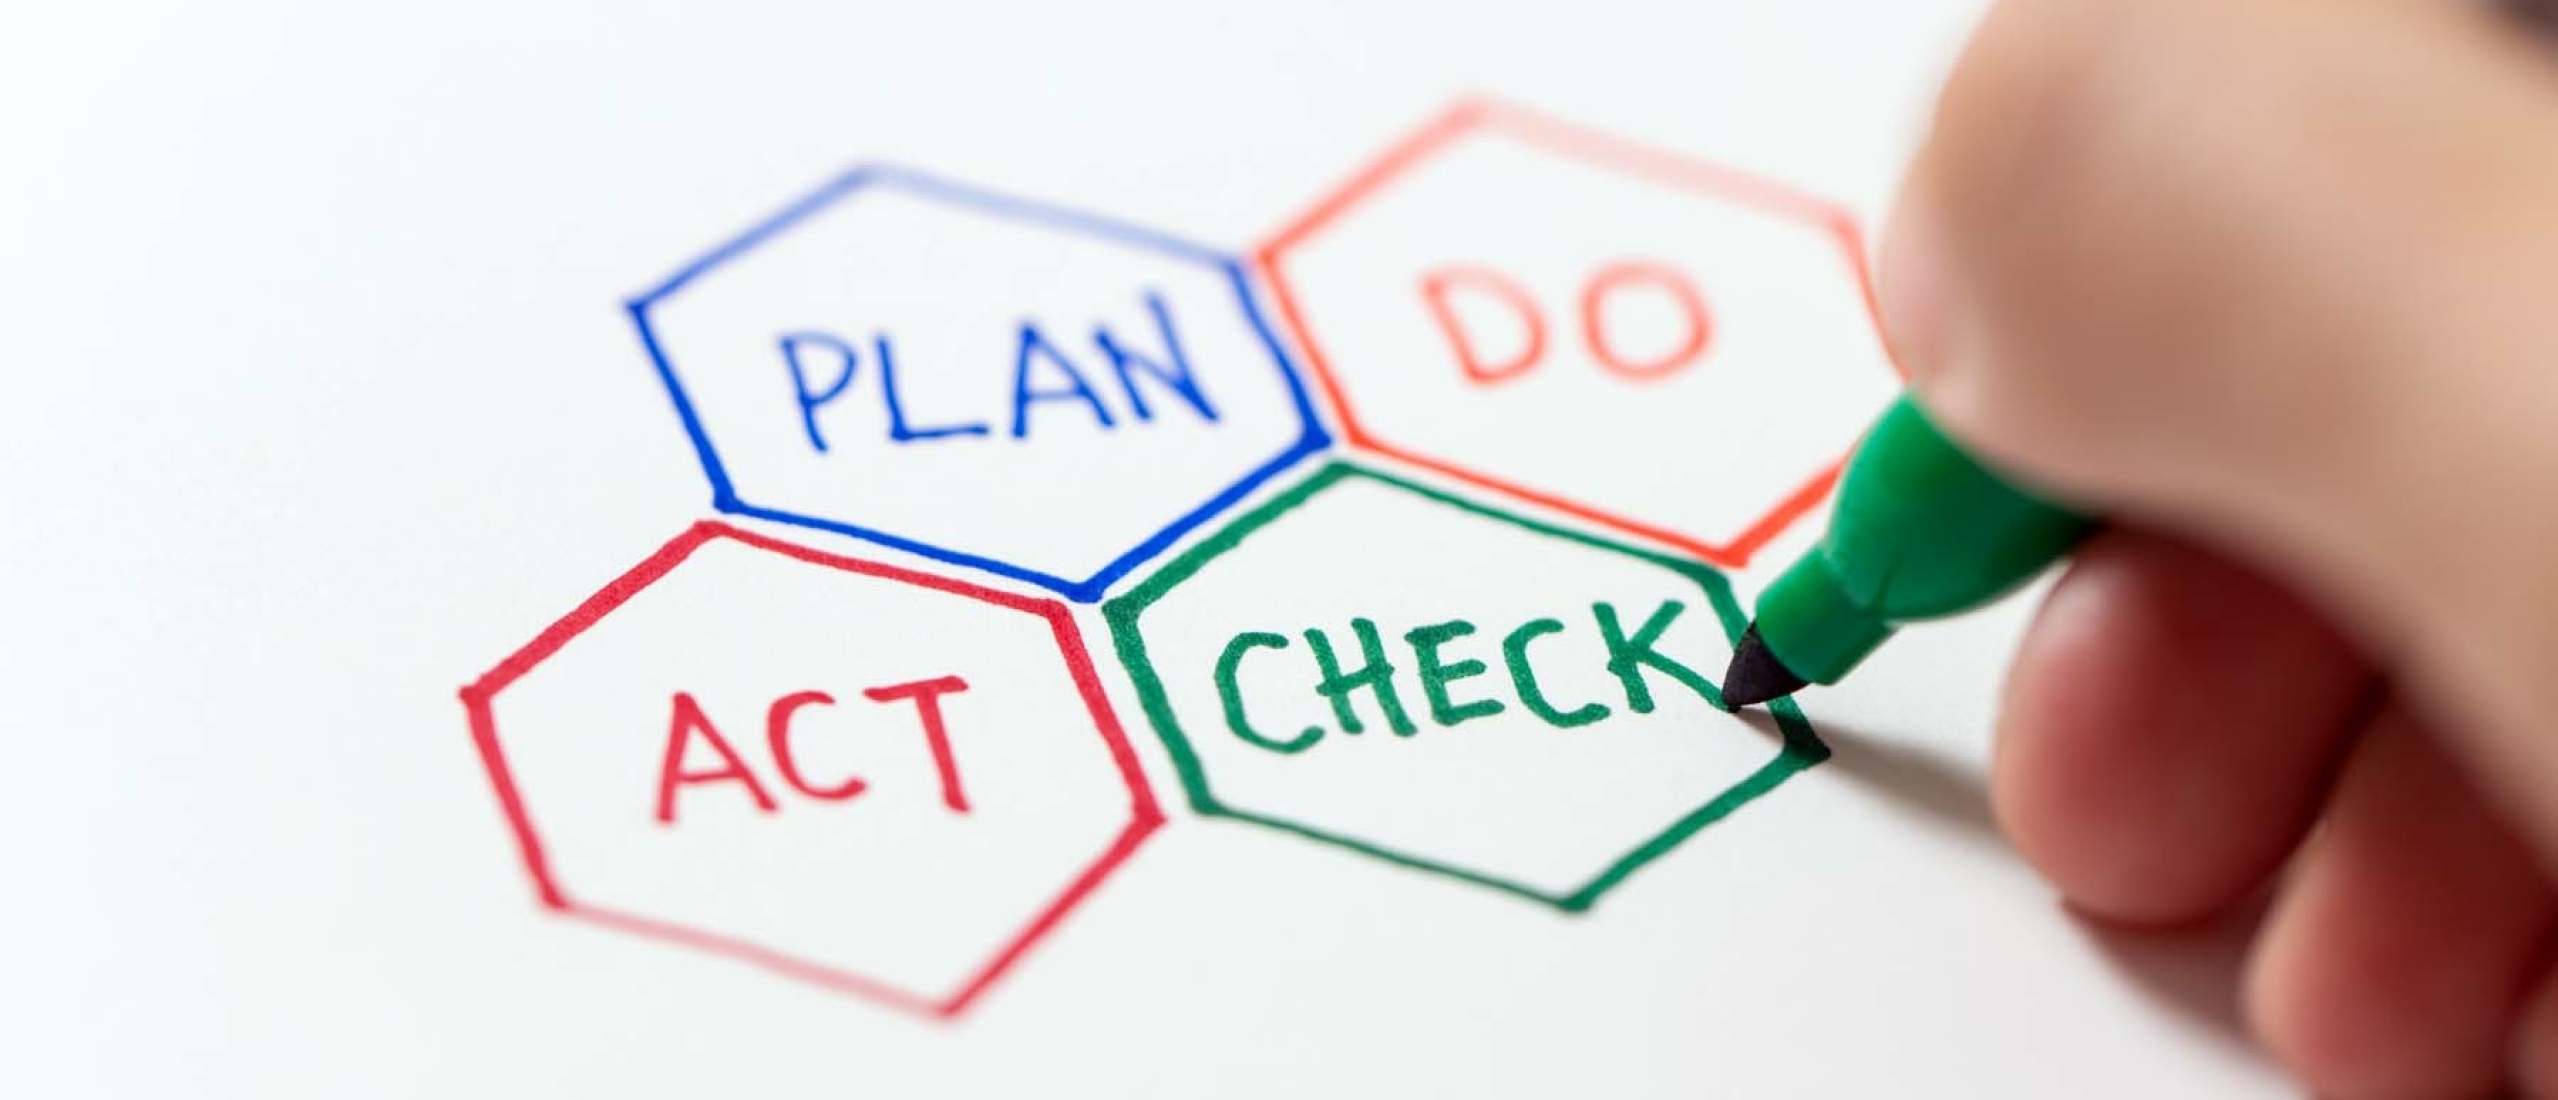 The PDCA cycle (Plan-Do-Check-Act) in relation to the ISO 9001 standard requirements